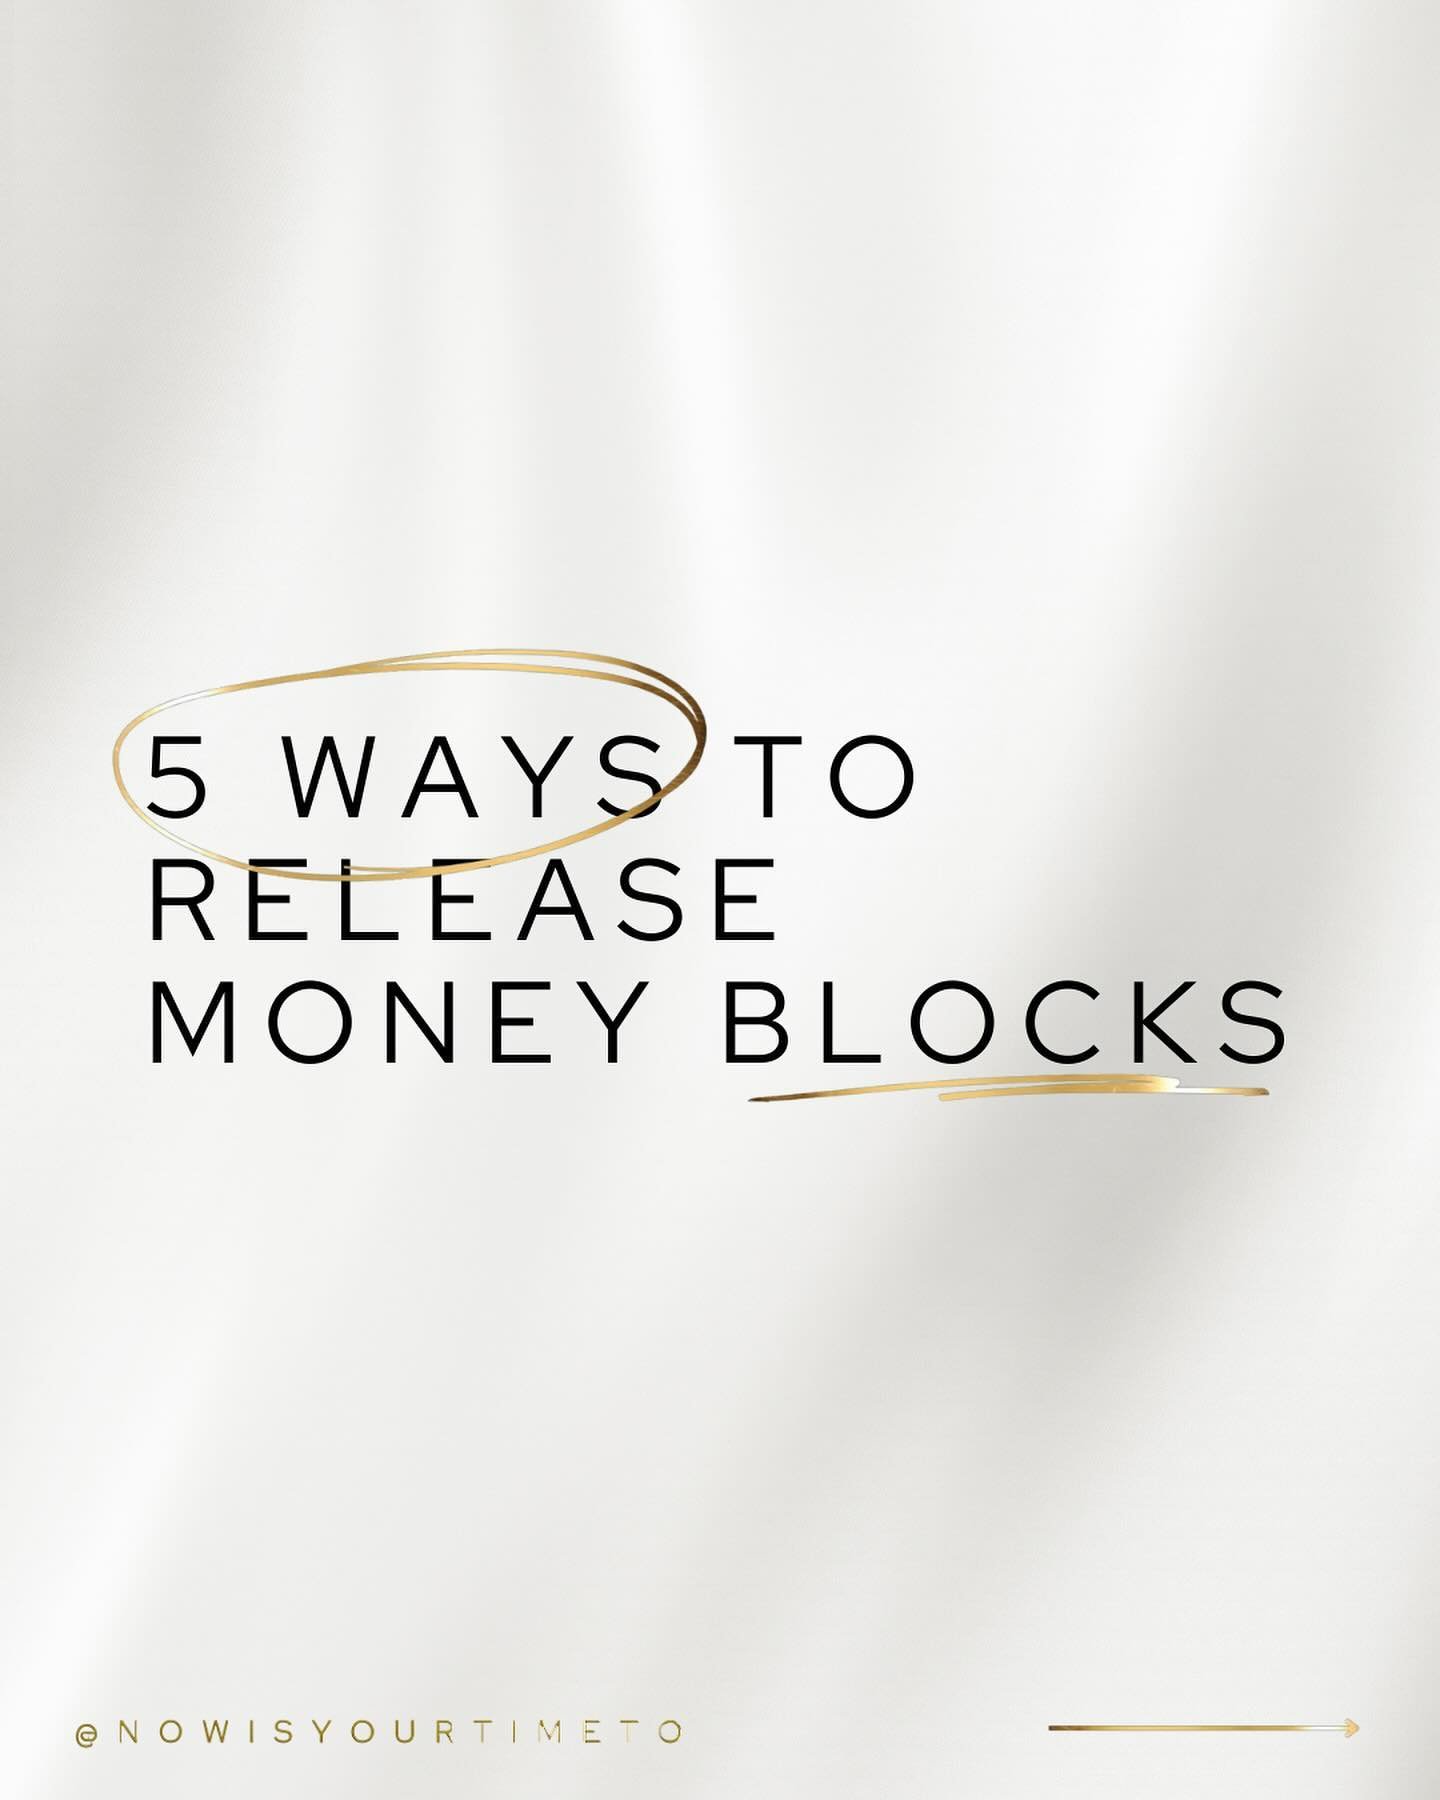 Save this so you can release your money mindset blocks and start receiving the abundance you were born for 💸

-
-
-
-
-
#breakthroughs #betterthingsarecoming #speakitintoexistence #knowyourvalue #livethelifeyouwant #loveyoufirst #takeachance #maketo